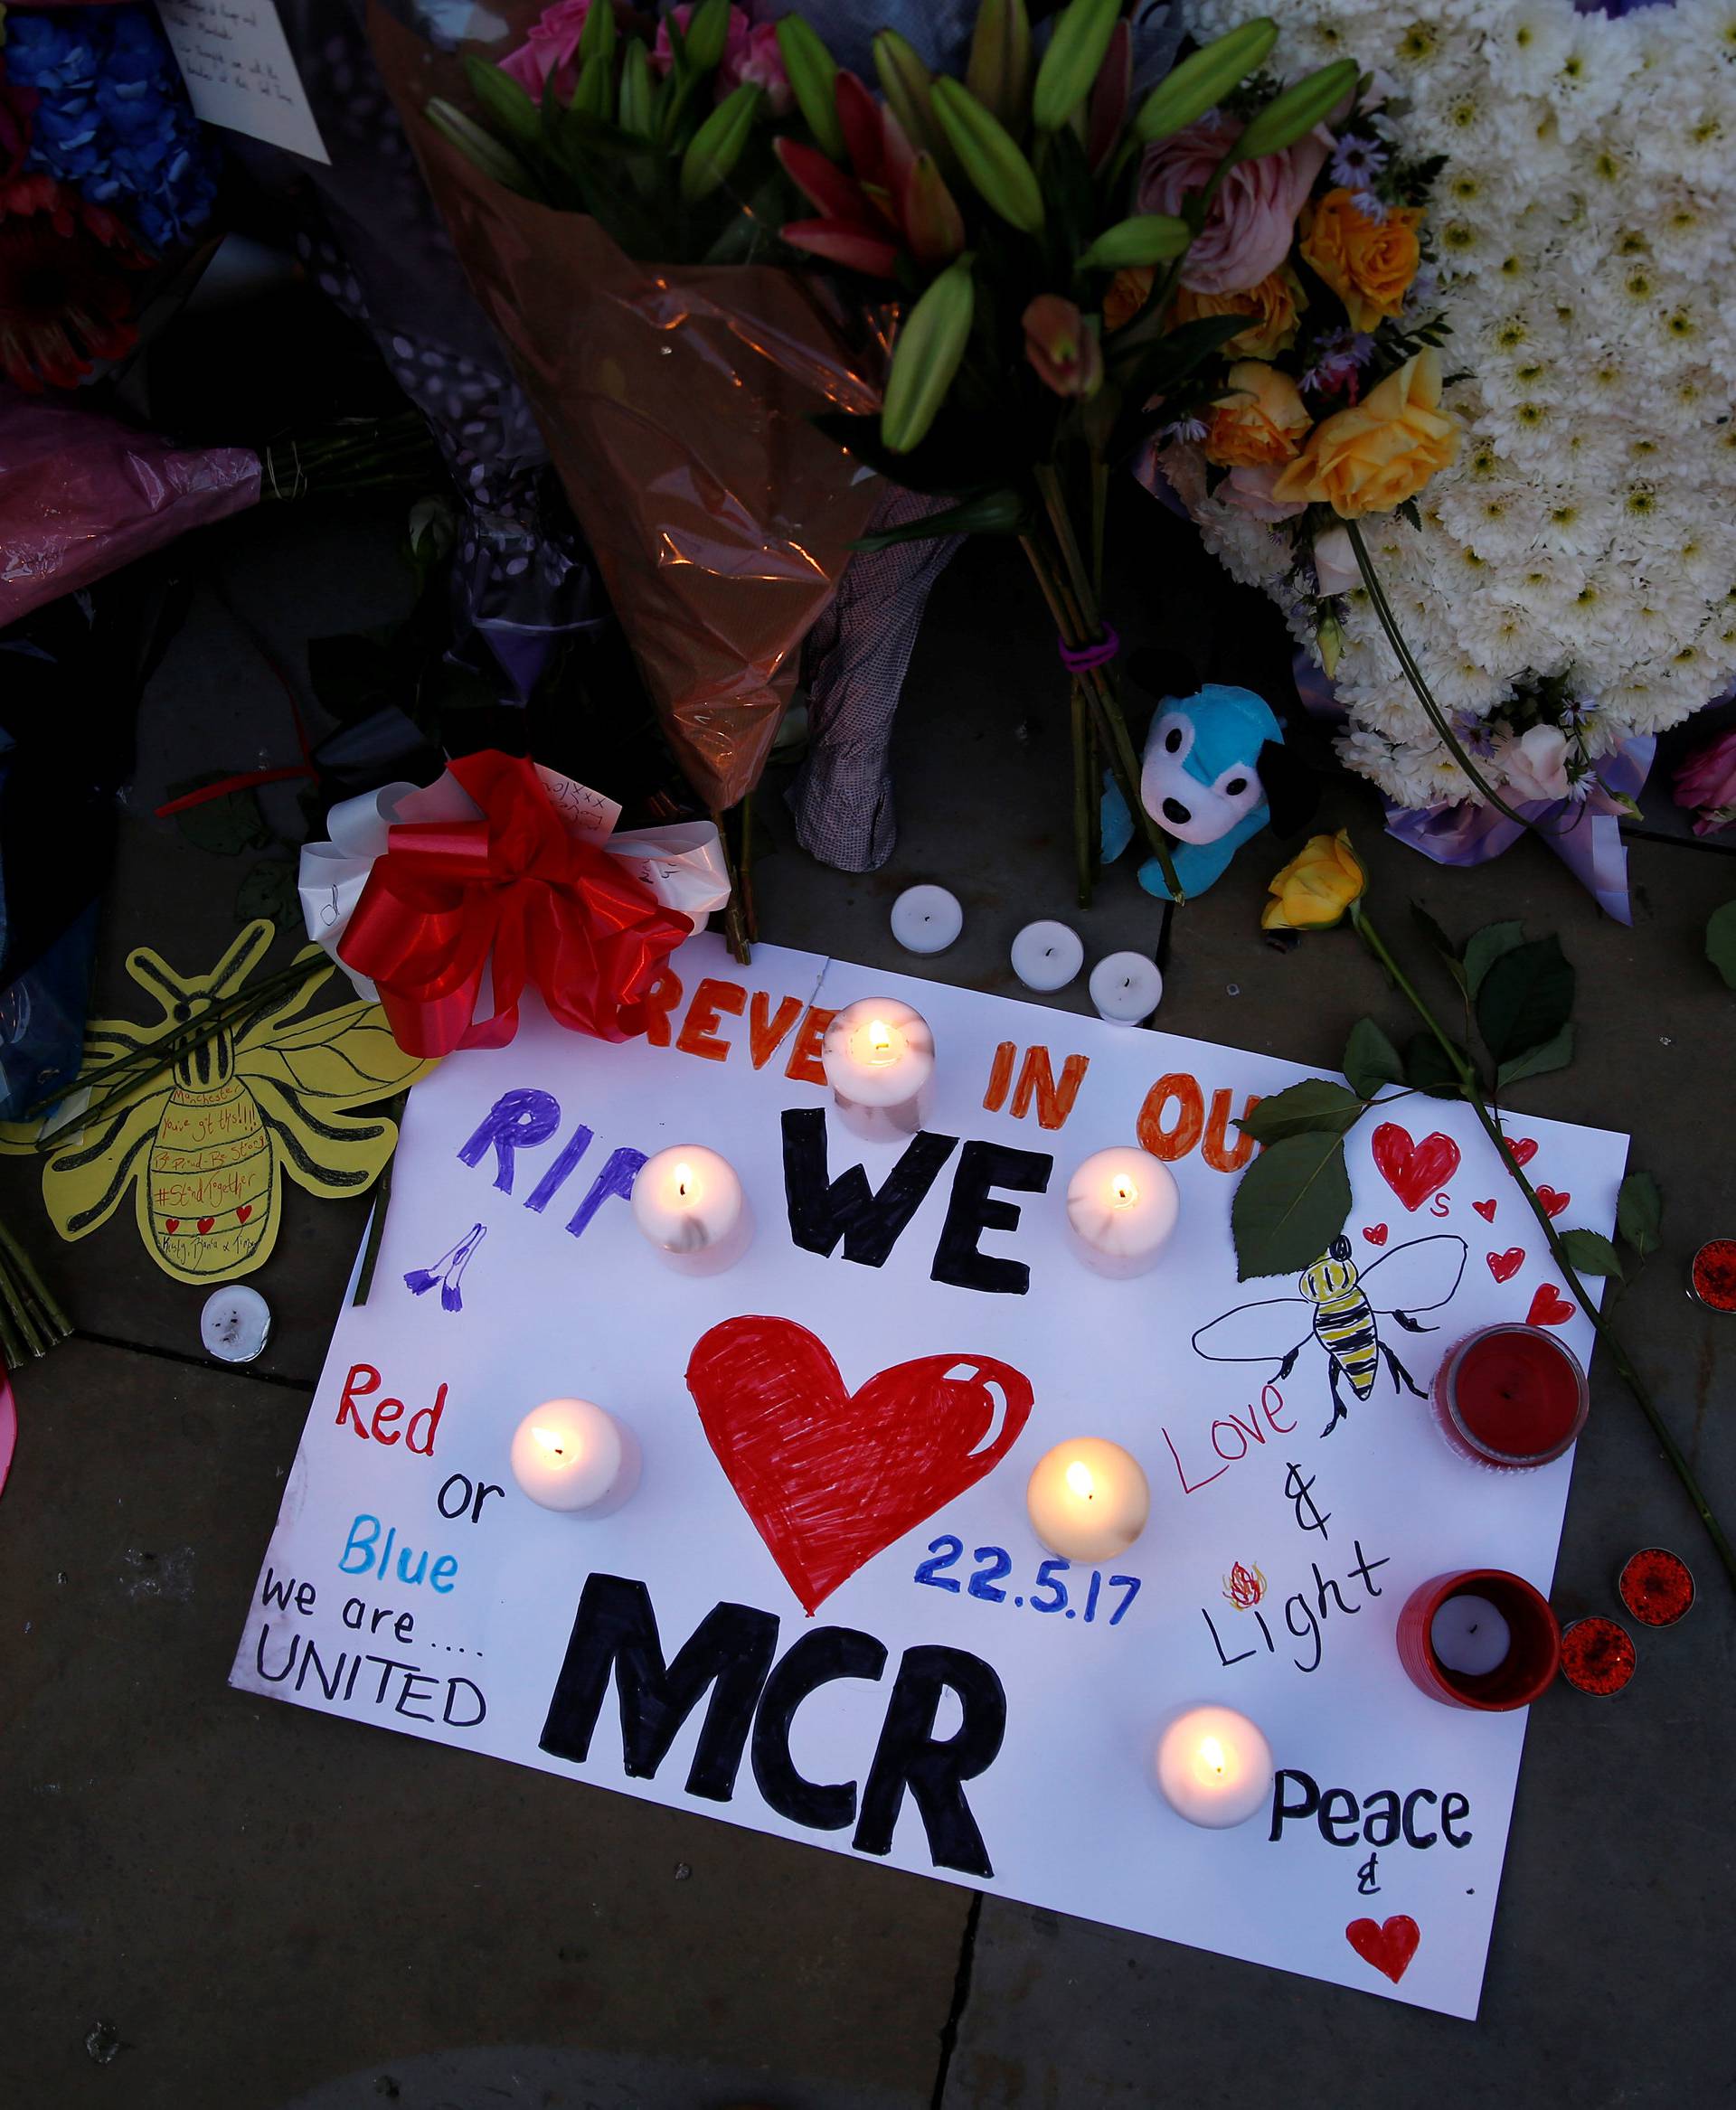 Flowers and messages are left for the victims of the Manchester Arena attack in central Manchester